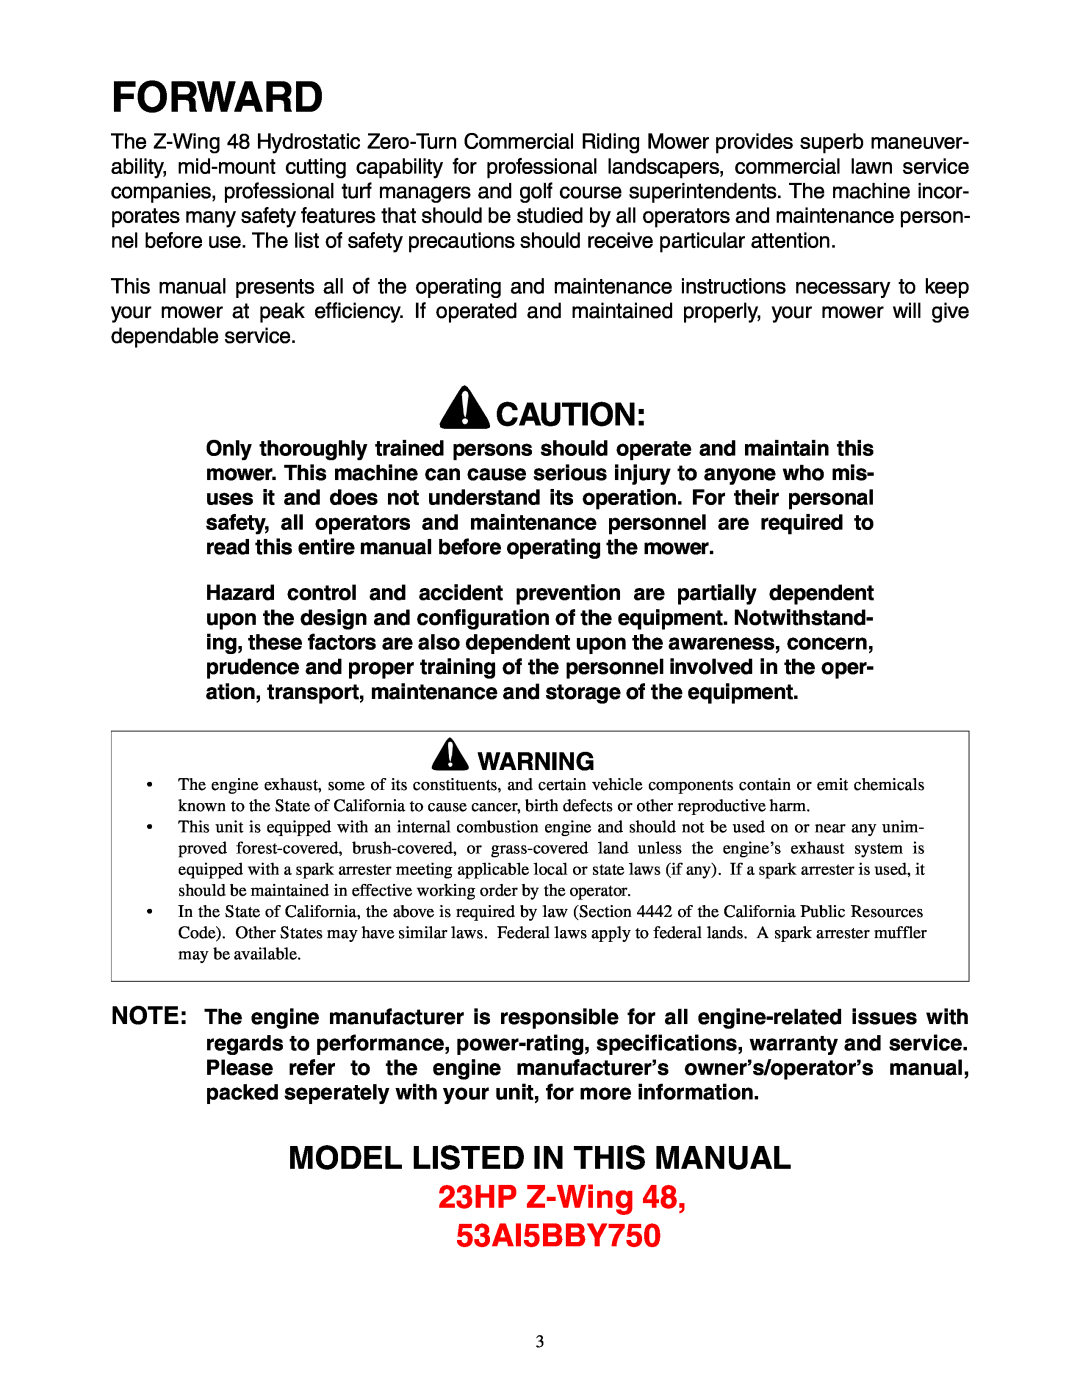 Cub Cadet Z - Wing 48 service manual Forward, MODEL LISTED IN THIS MANUAL 23HP Z-Wing48, 53AI5BBY750 